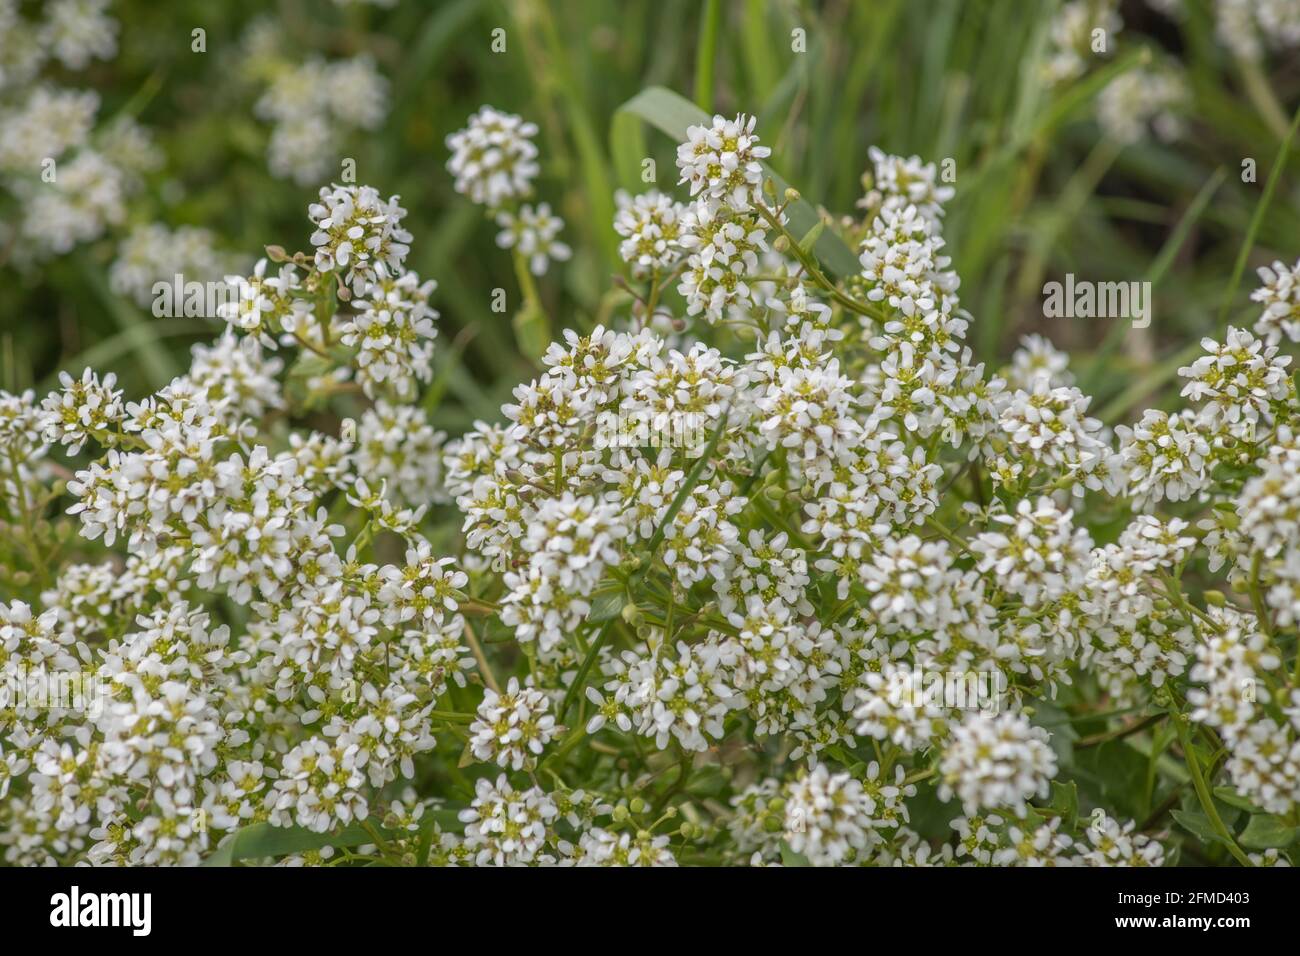 White flowers of Scurvy Grass / Cochlearia officinalis in salt marsh. Plant used to treat Scurvy as a vitamin C source. Traditional medicinal plants. Stock Photo